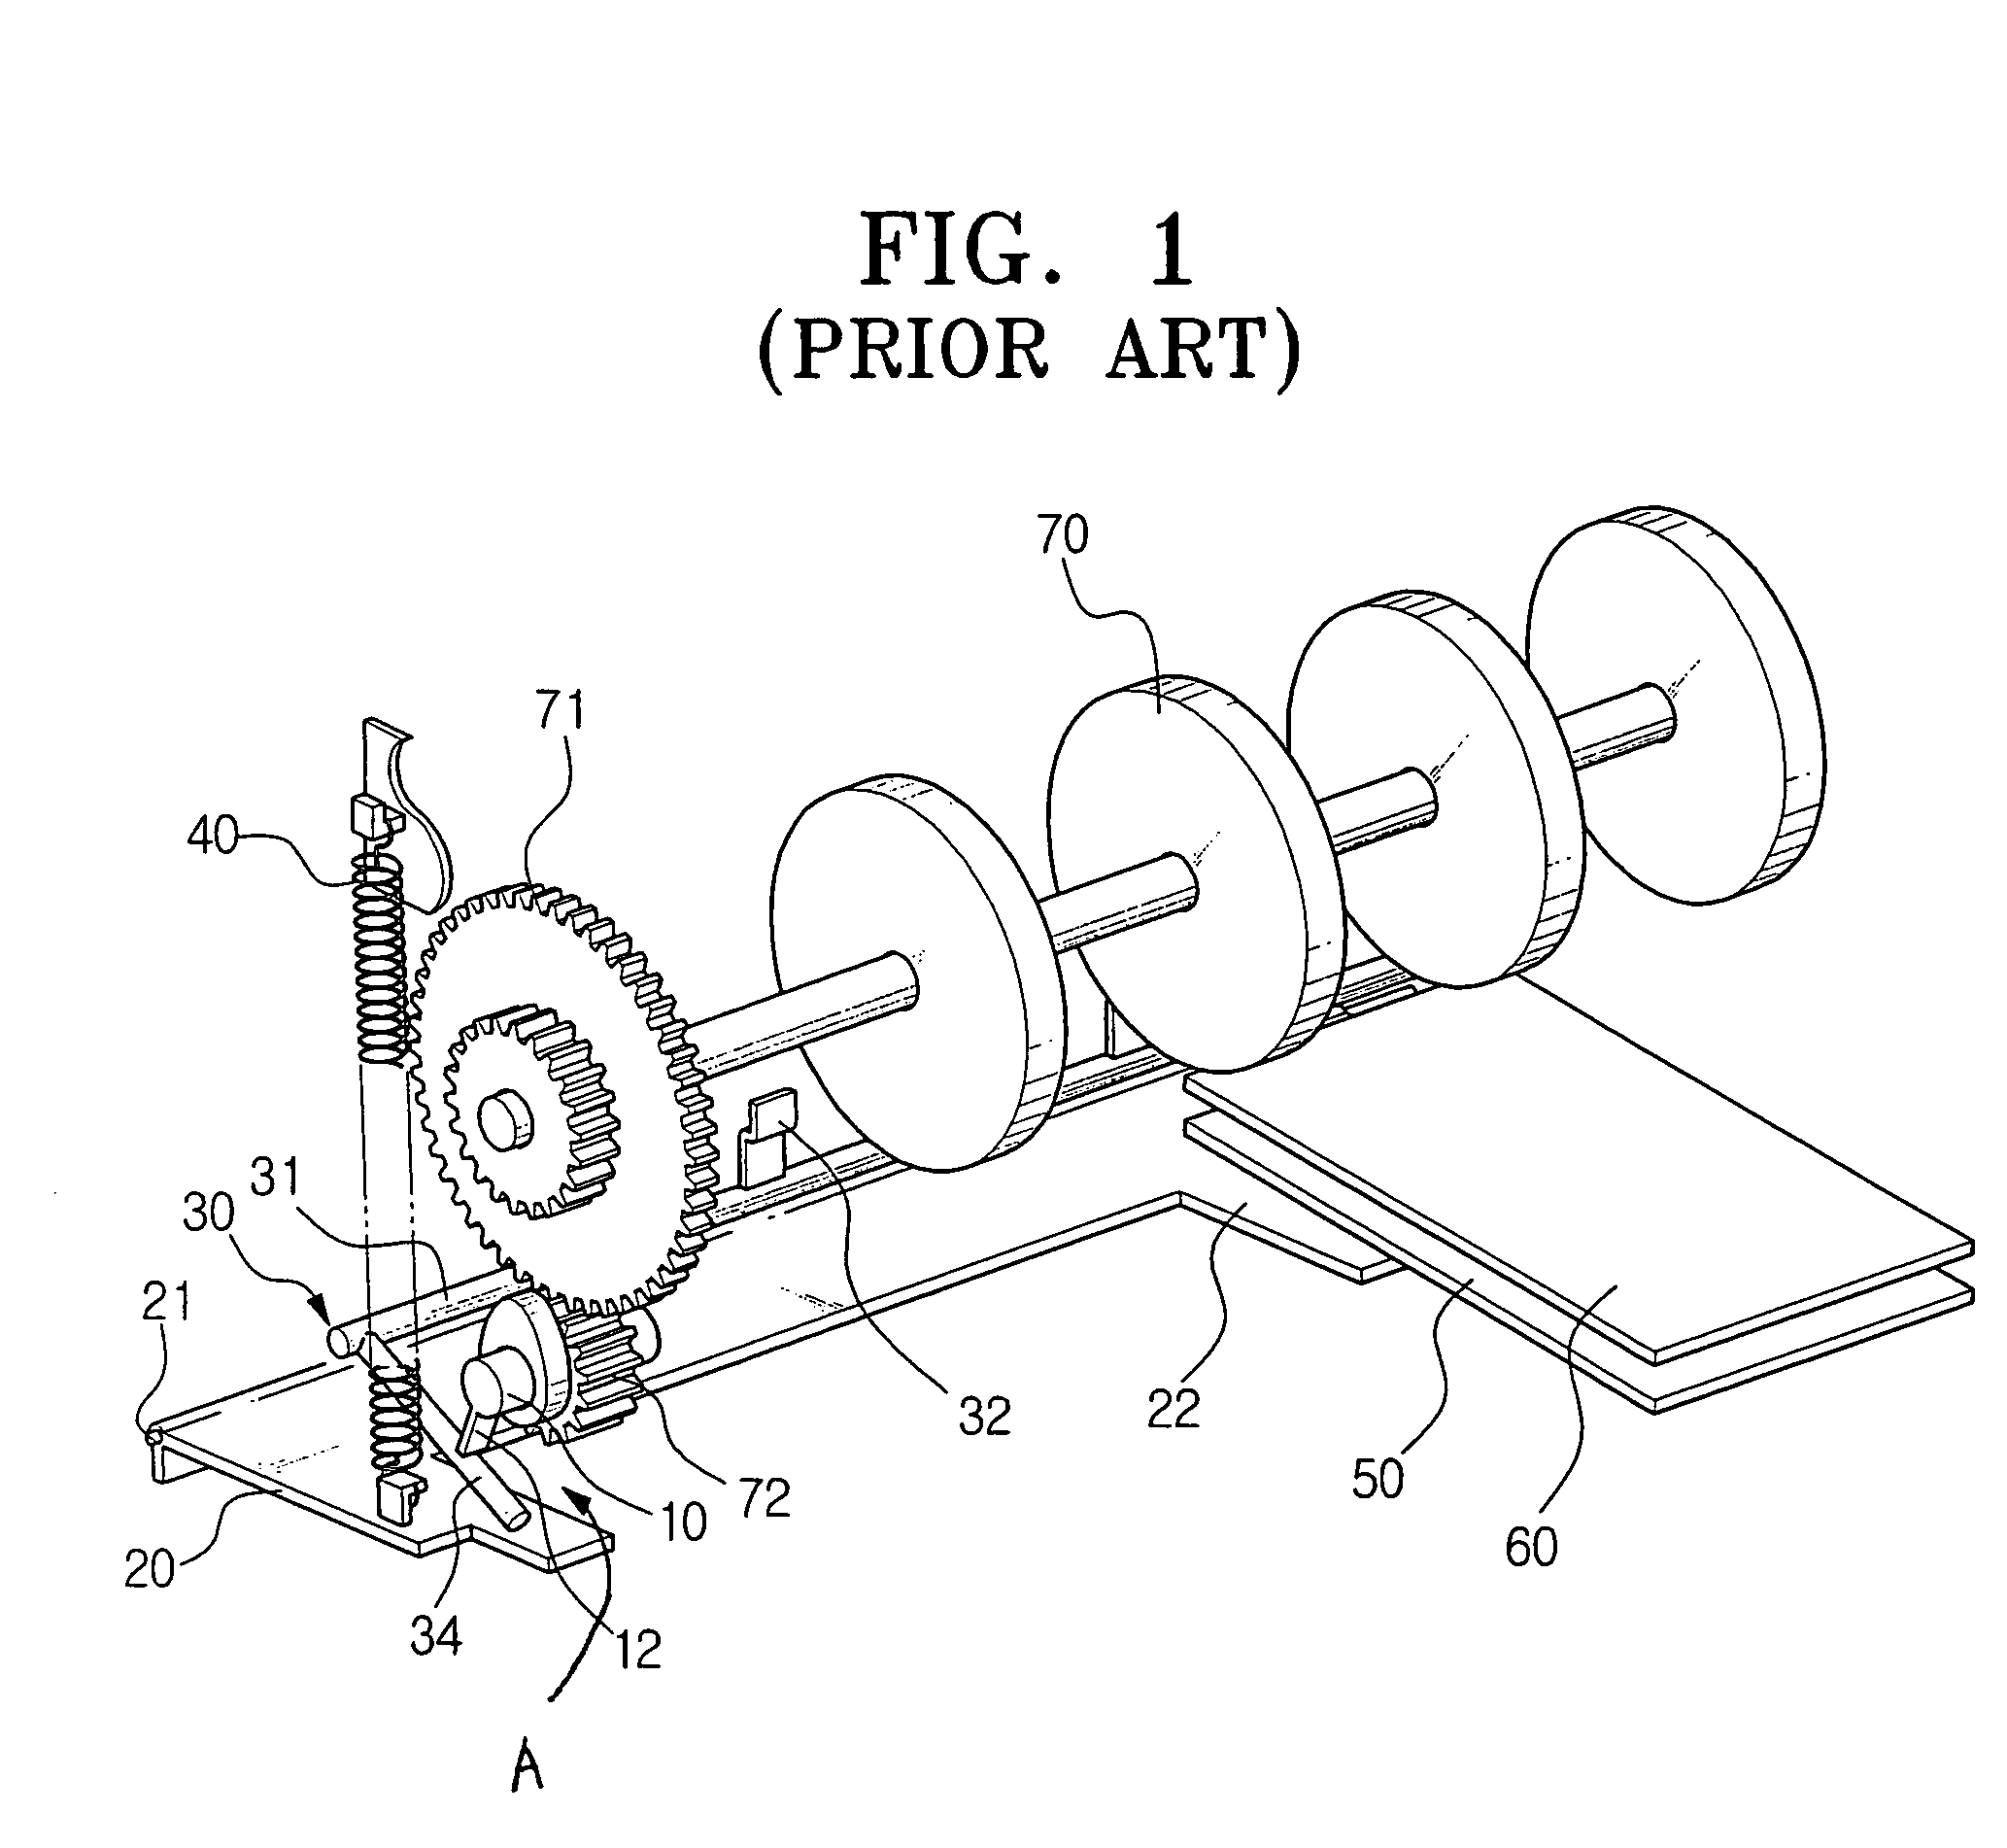 Paper insertion limiting device for a paper feeding unit